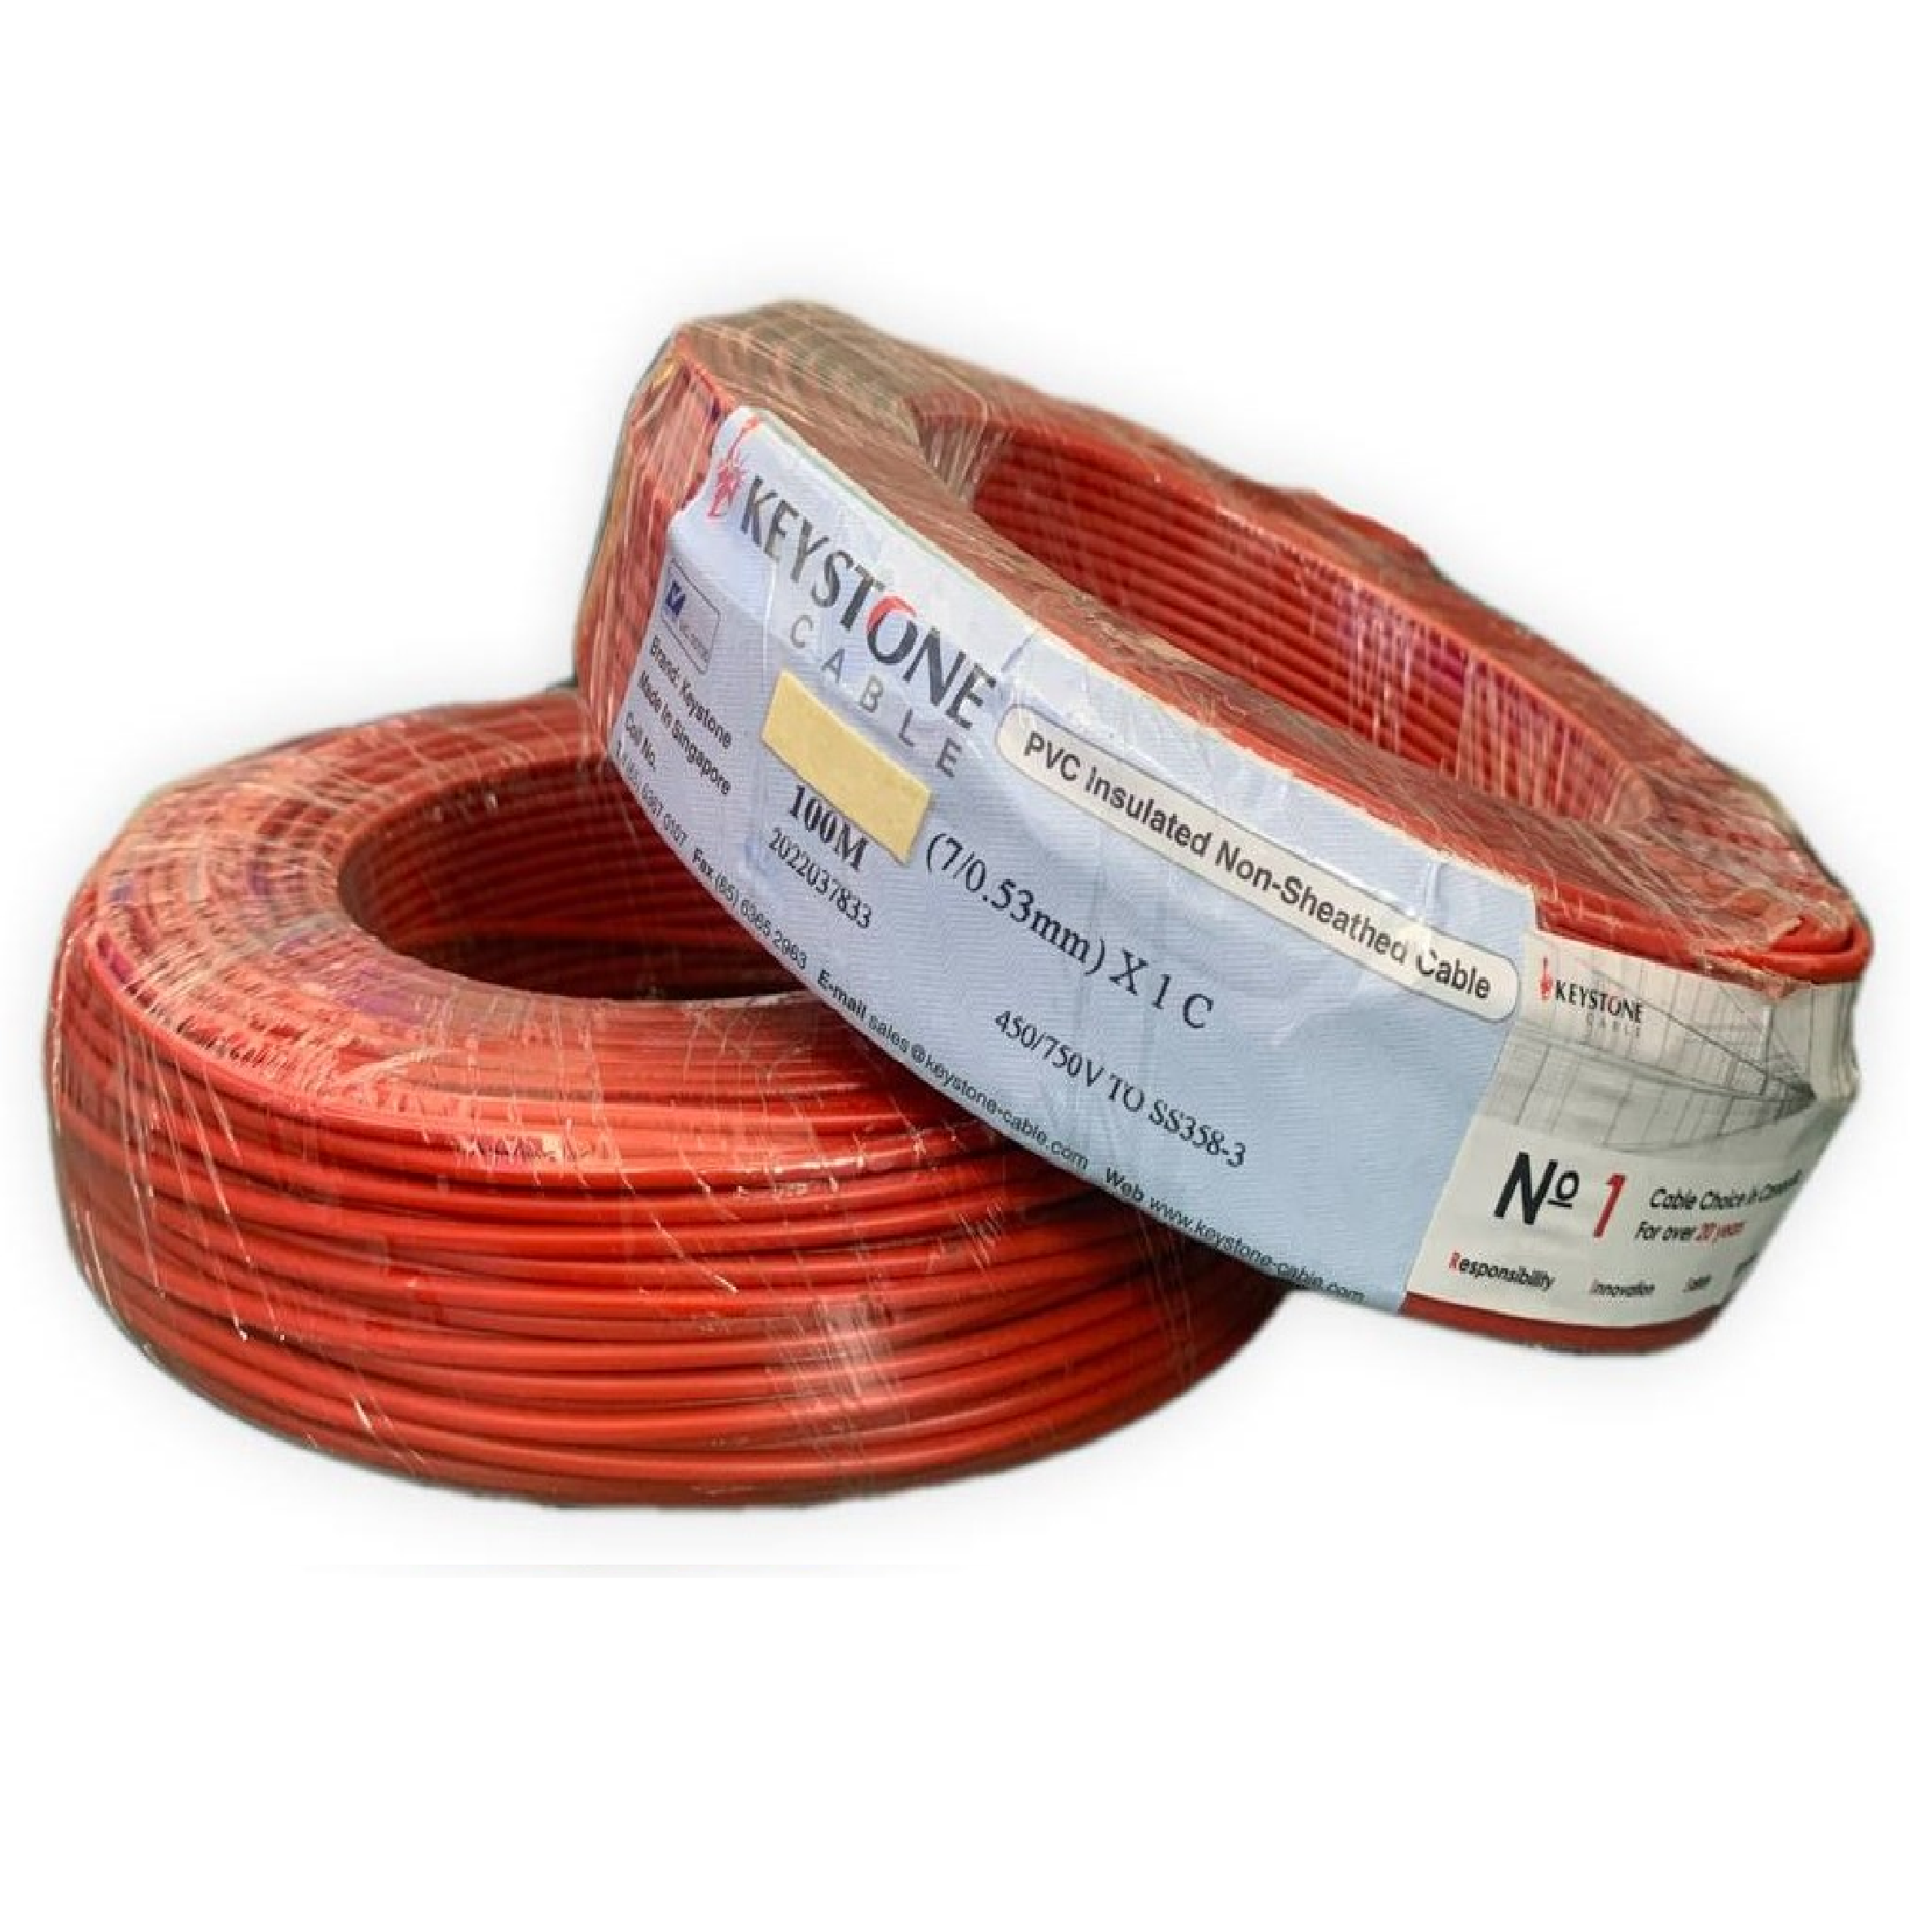 KEYSTONE RED PVC Insulated Non-Sheathed Cable 6.0mm2 450/750V X 100Metres